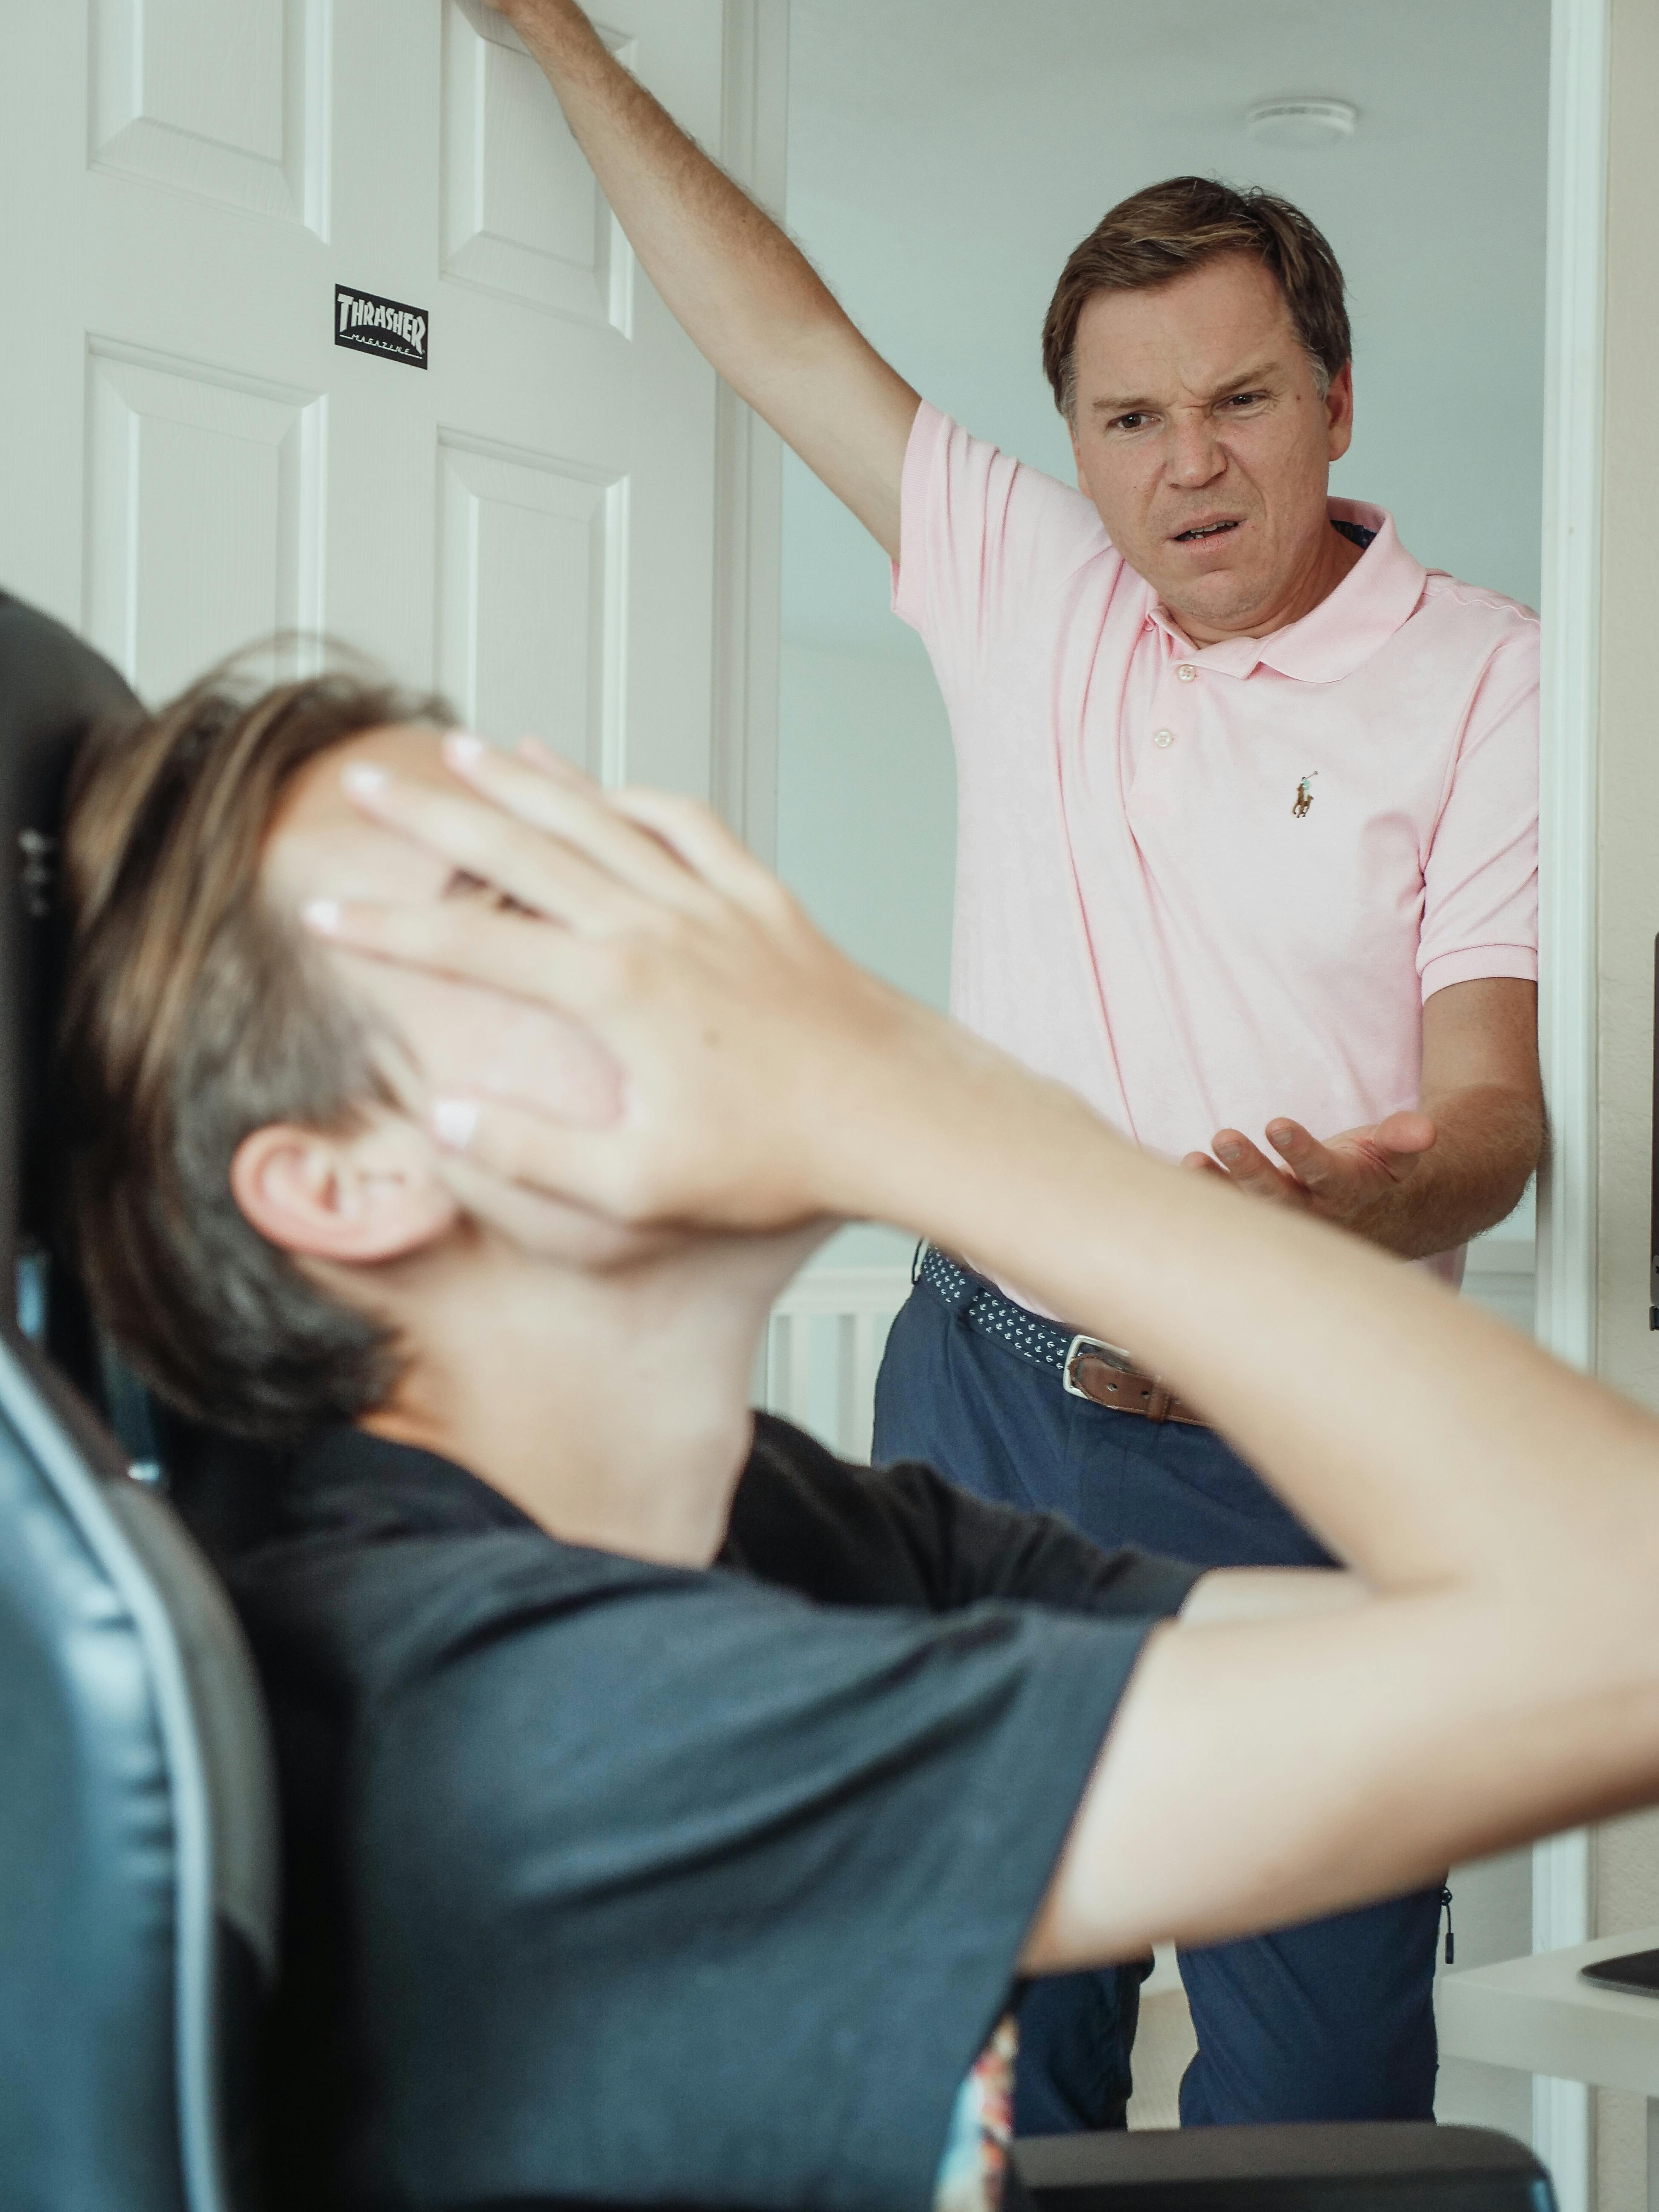 An angry dad | Source: Pexels